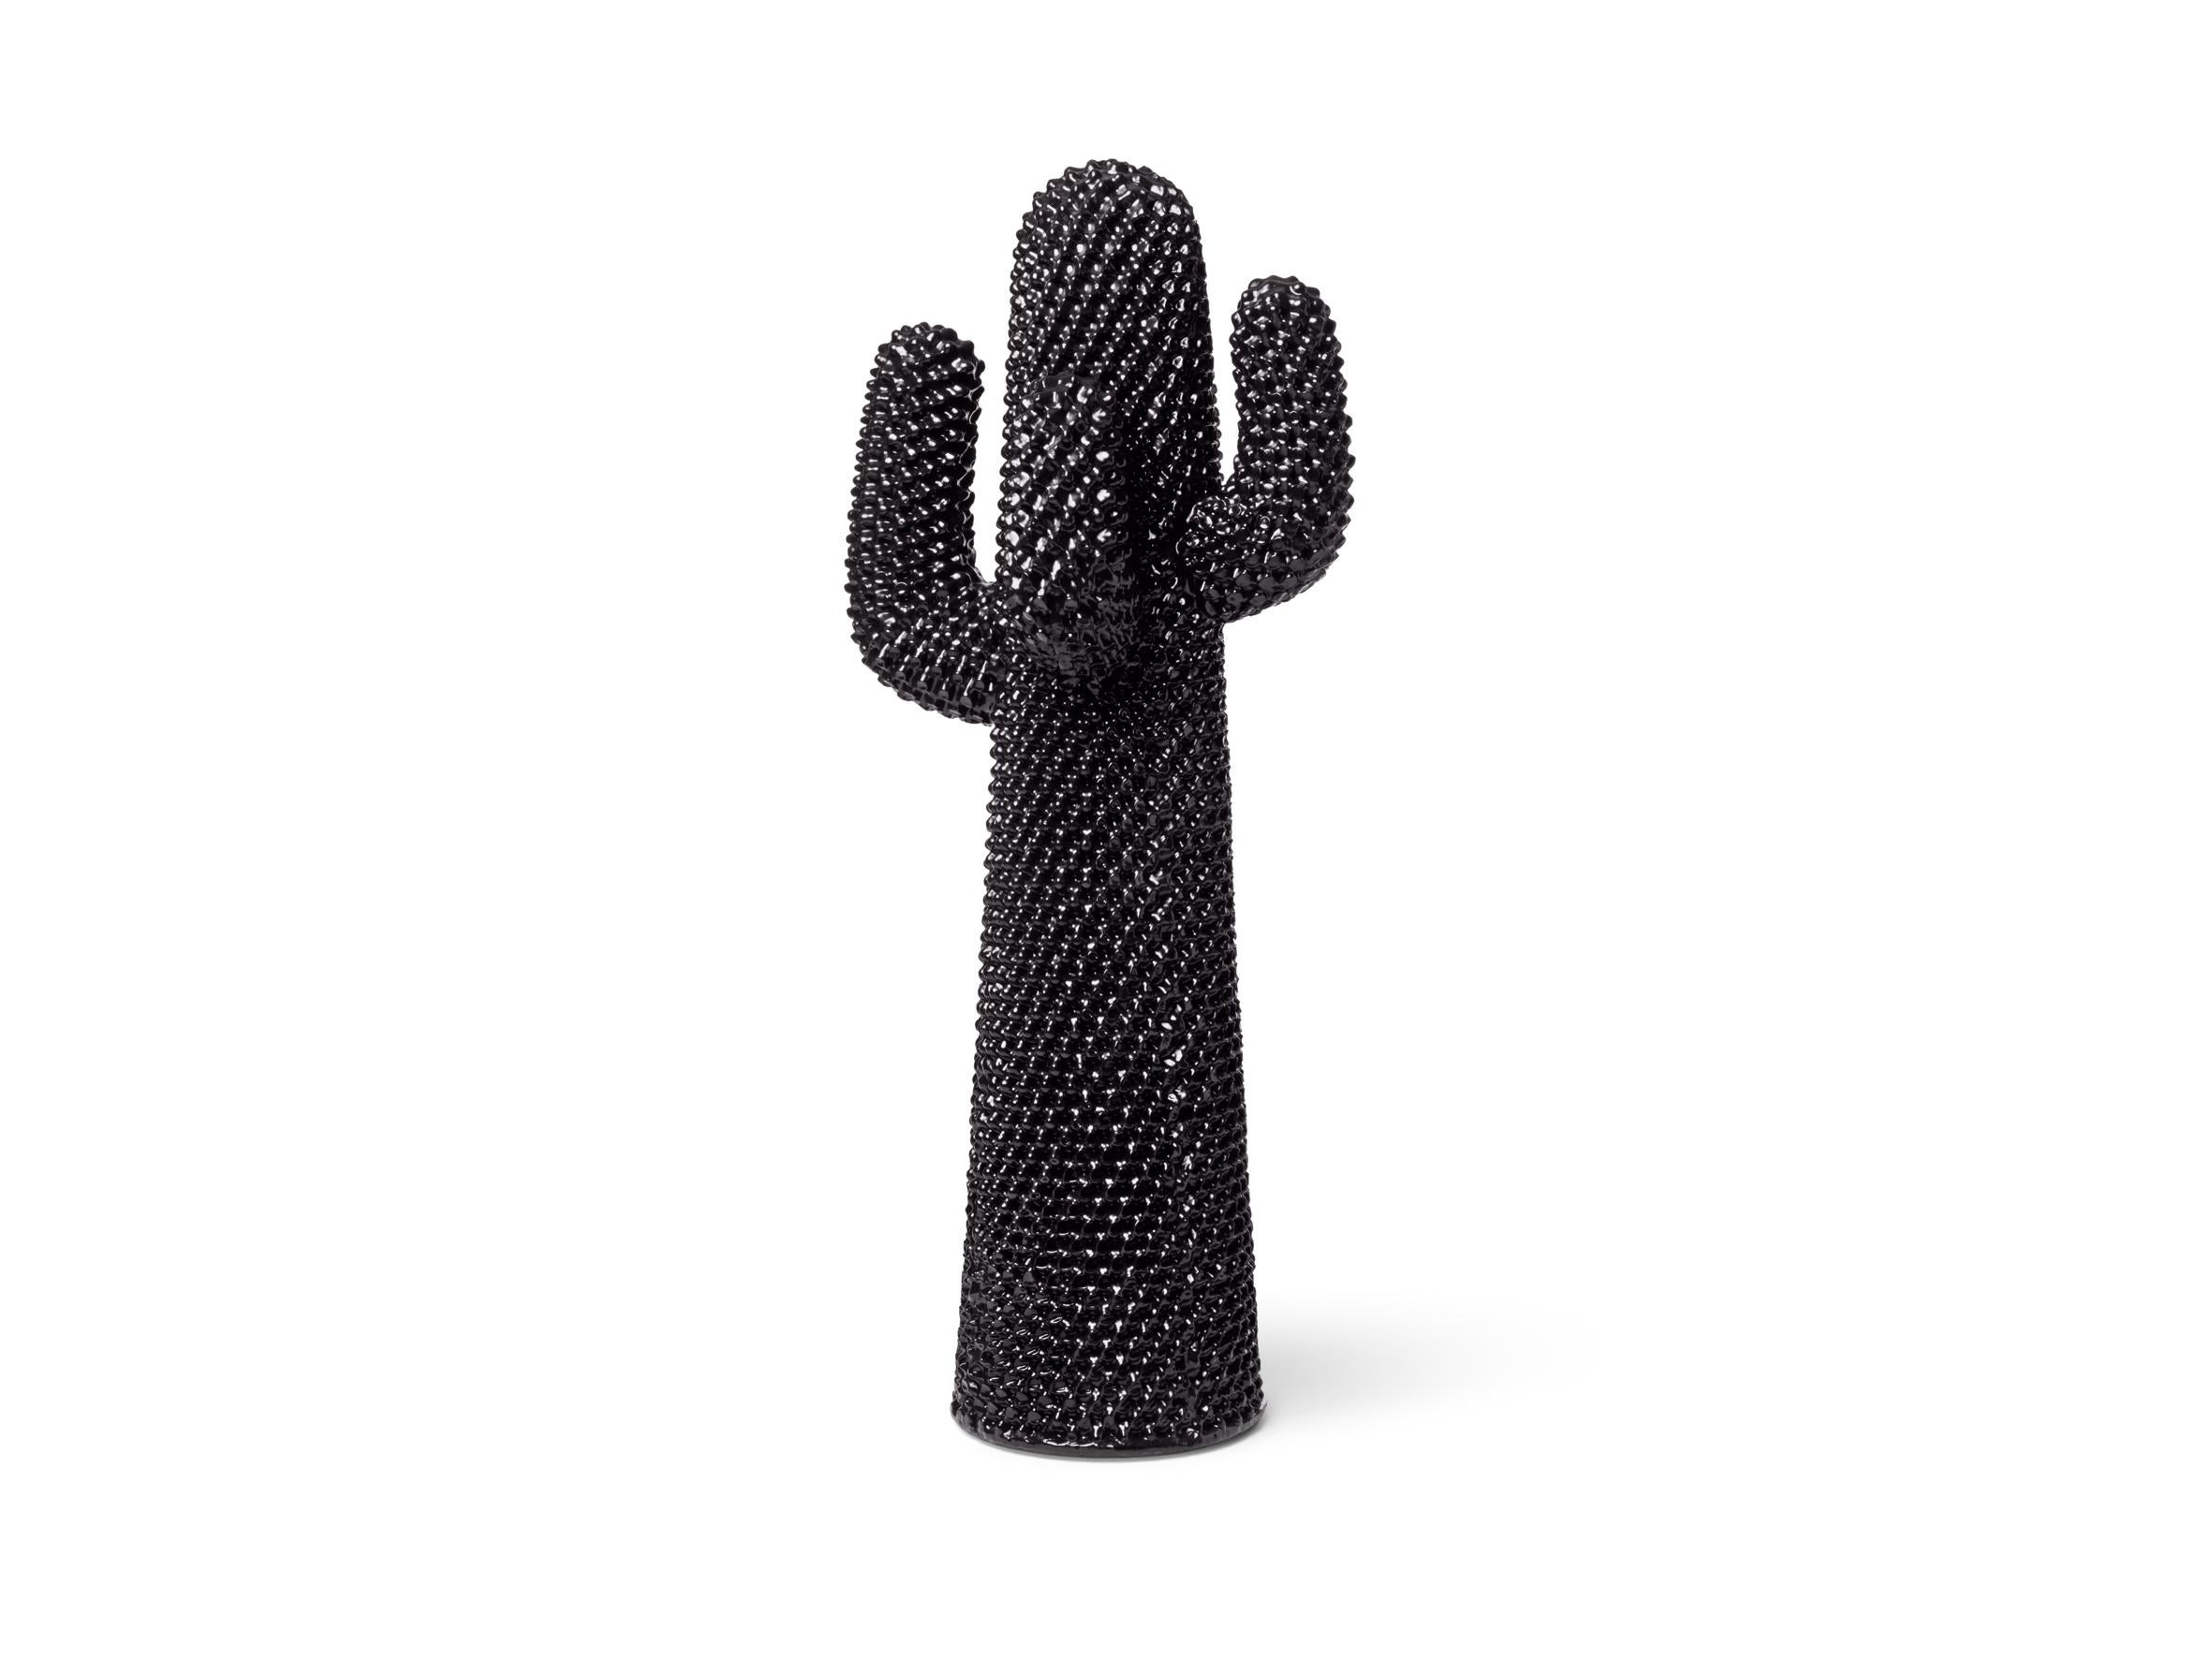 Cactus is the icon of Italian design that has revolutionized the domestic landscape. Made of flexible polyurethane this hall tree with four cantilever arms is as tall as a person and looks like an ironic TOTEM. It was created in 1972 and since then